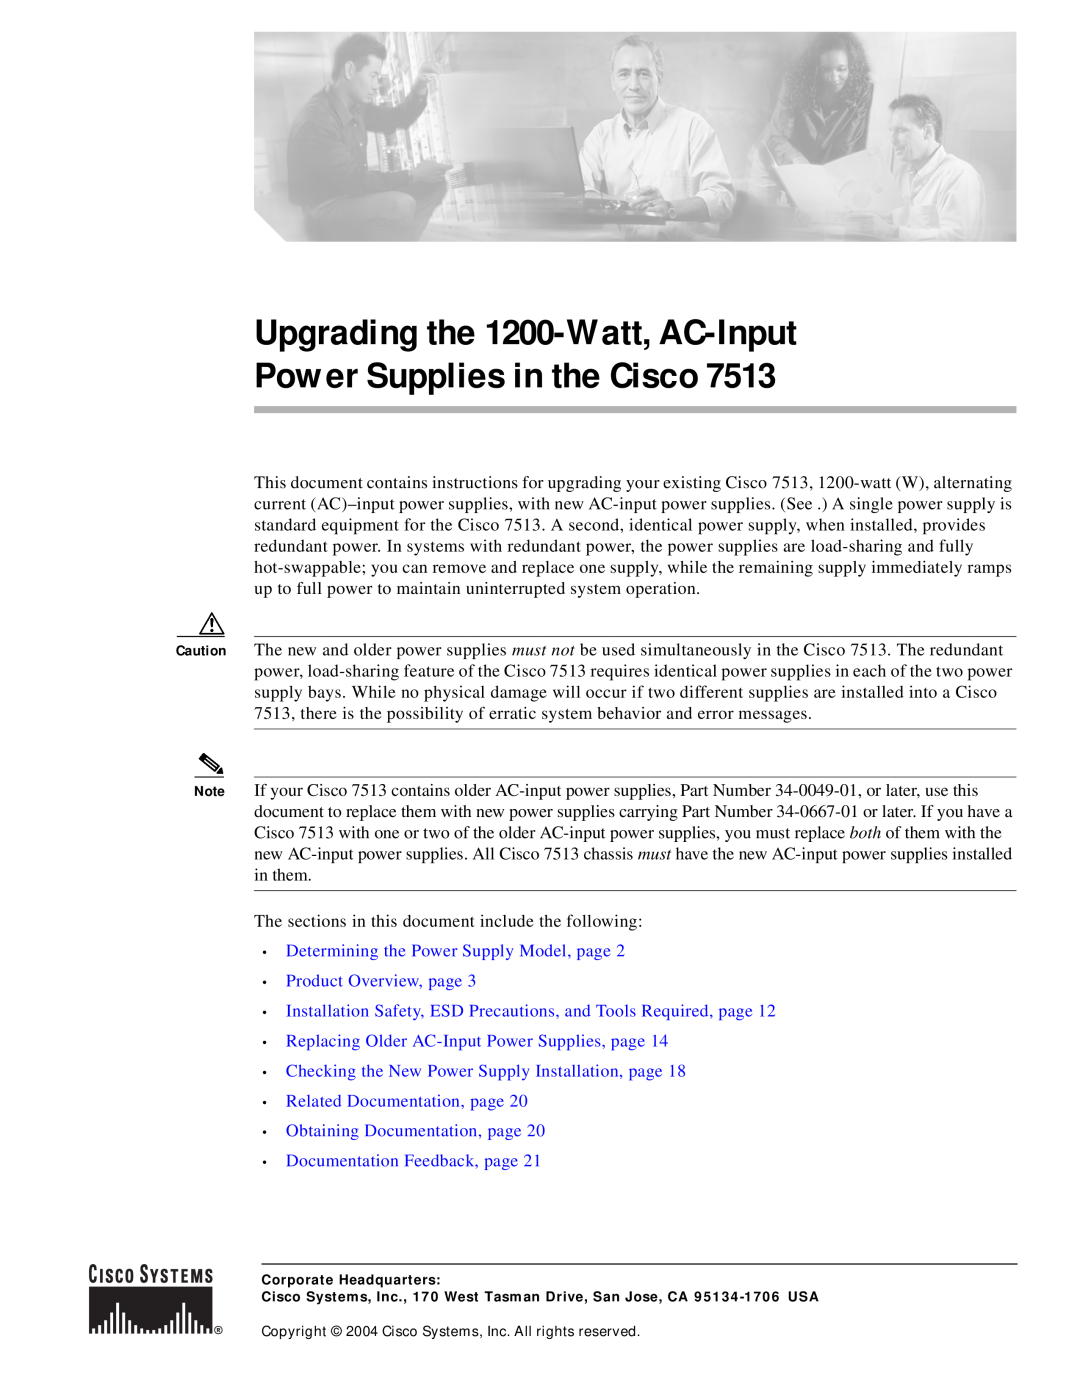 Cisco Systems 7513 manual Determining the Power Supply Model, page Product Overview, page, Documentation Feedback, page 